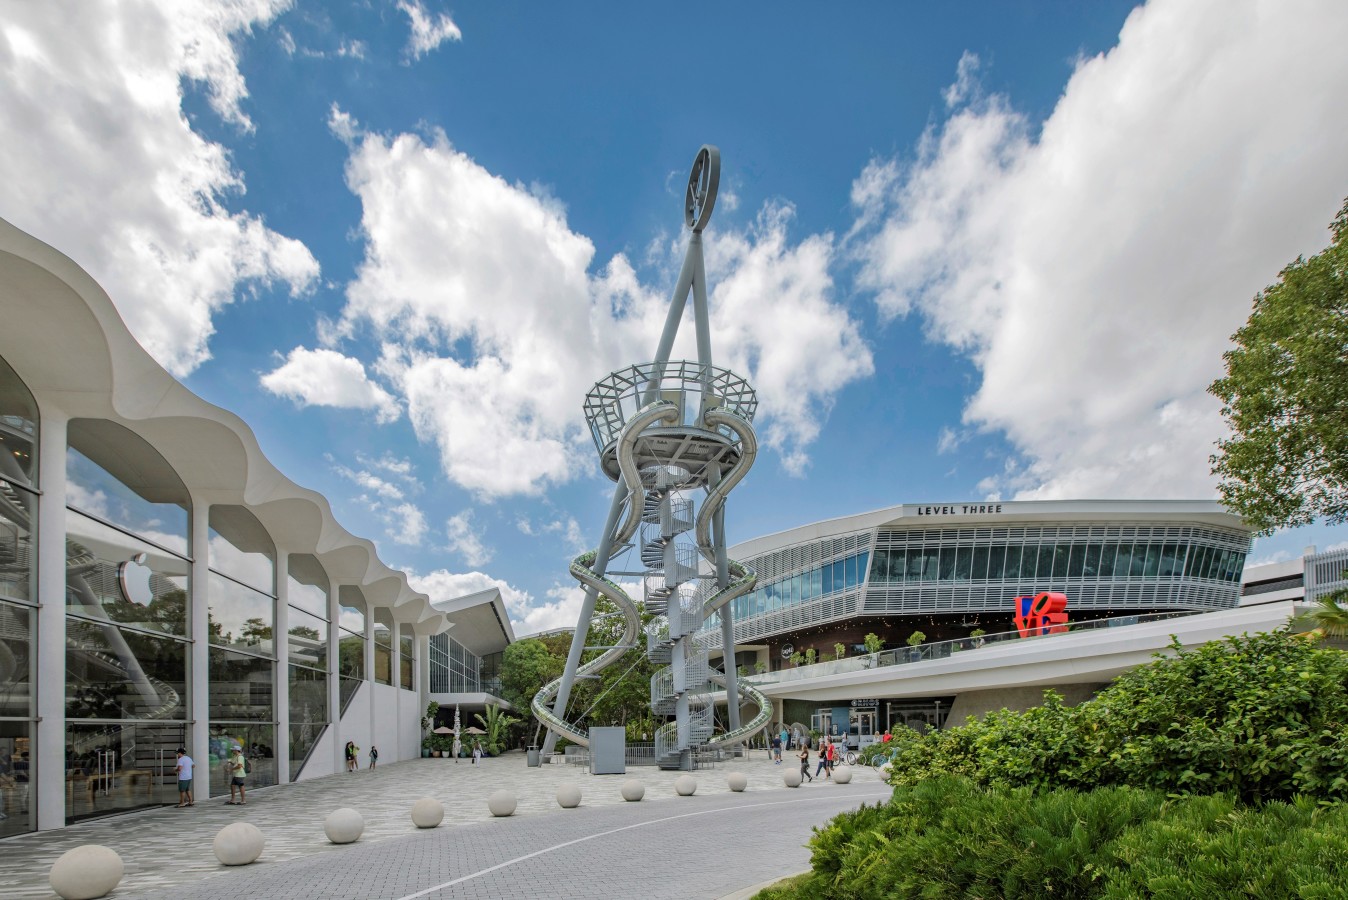 Aventura Mall-largest mall in Florida